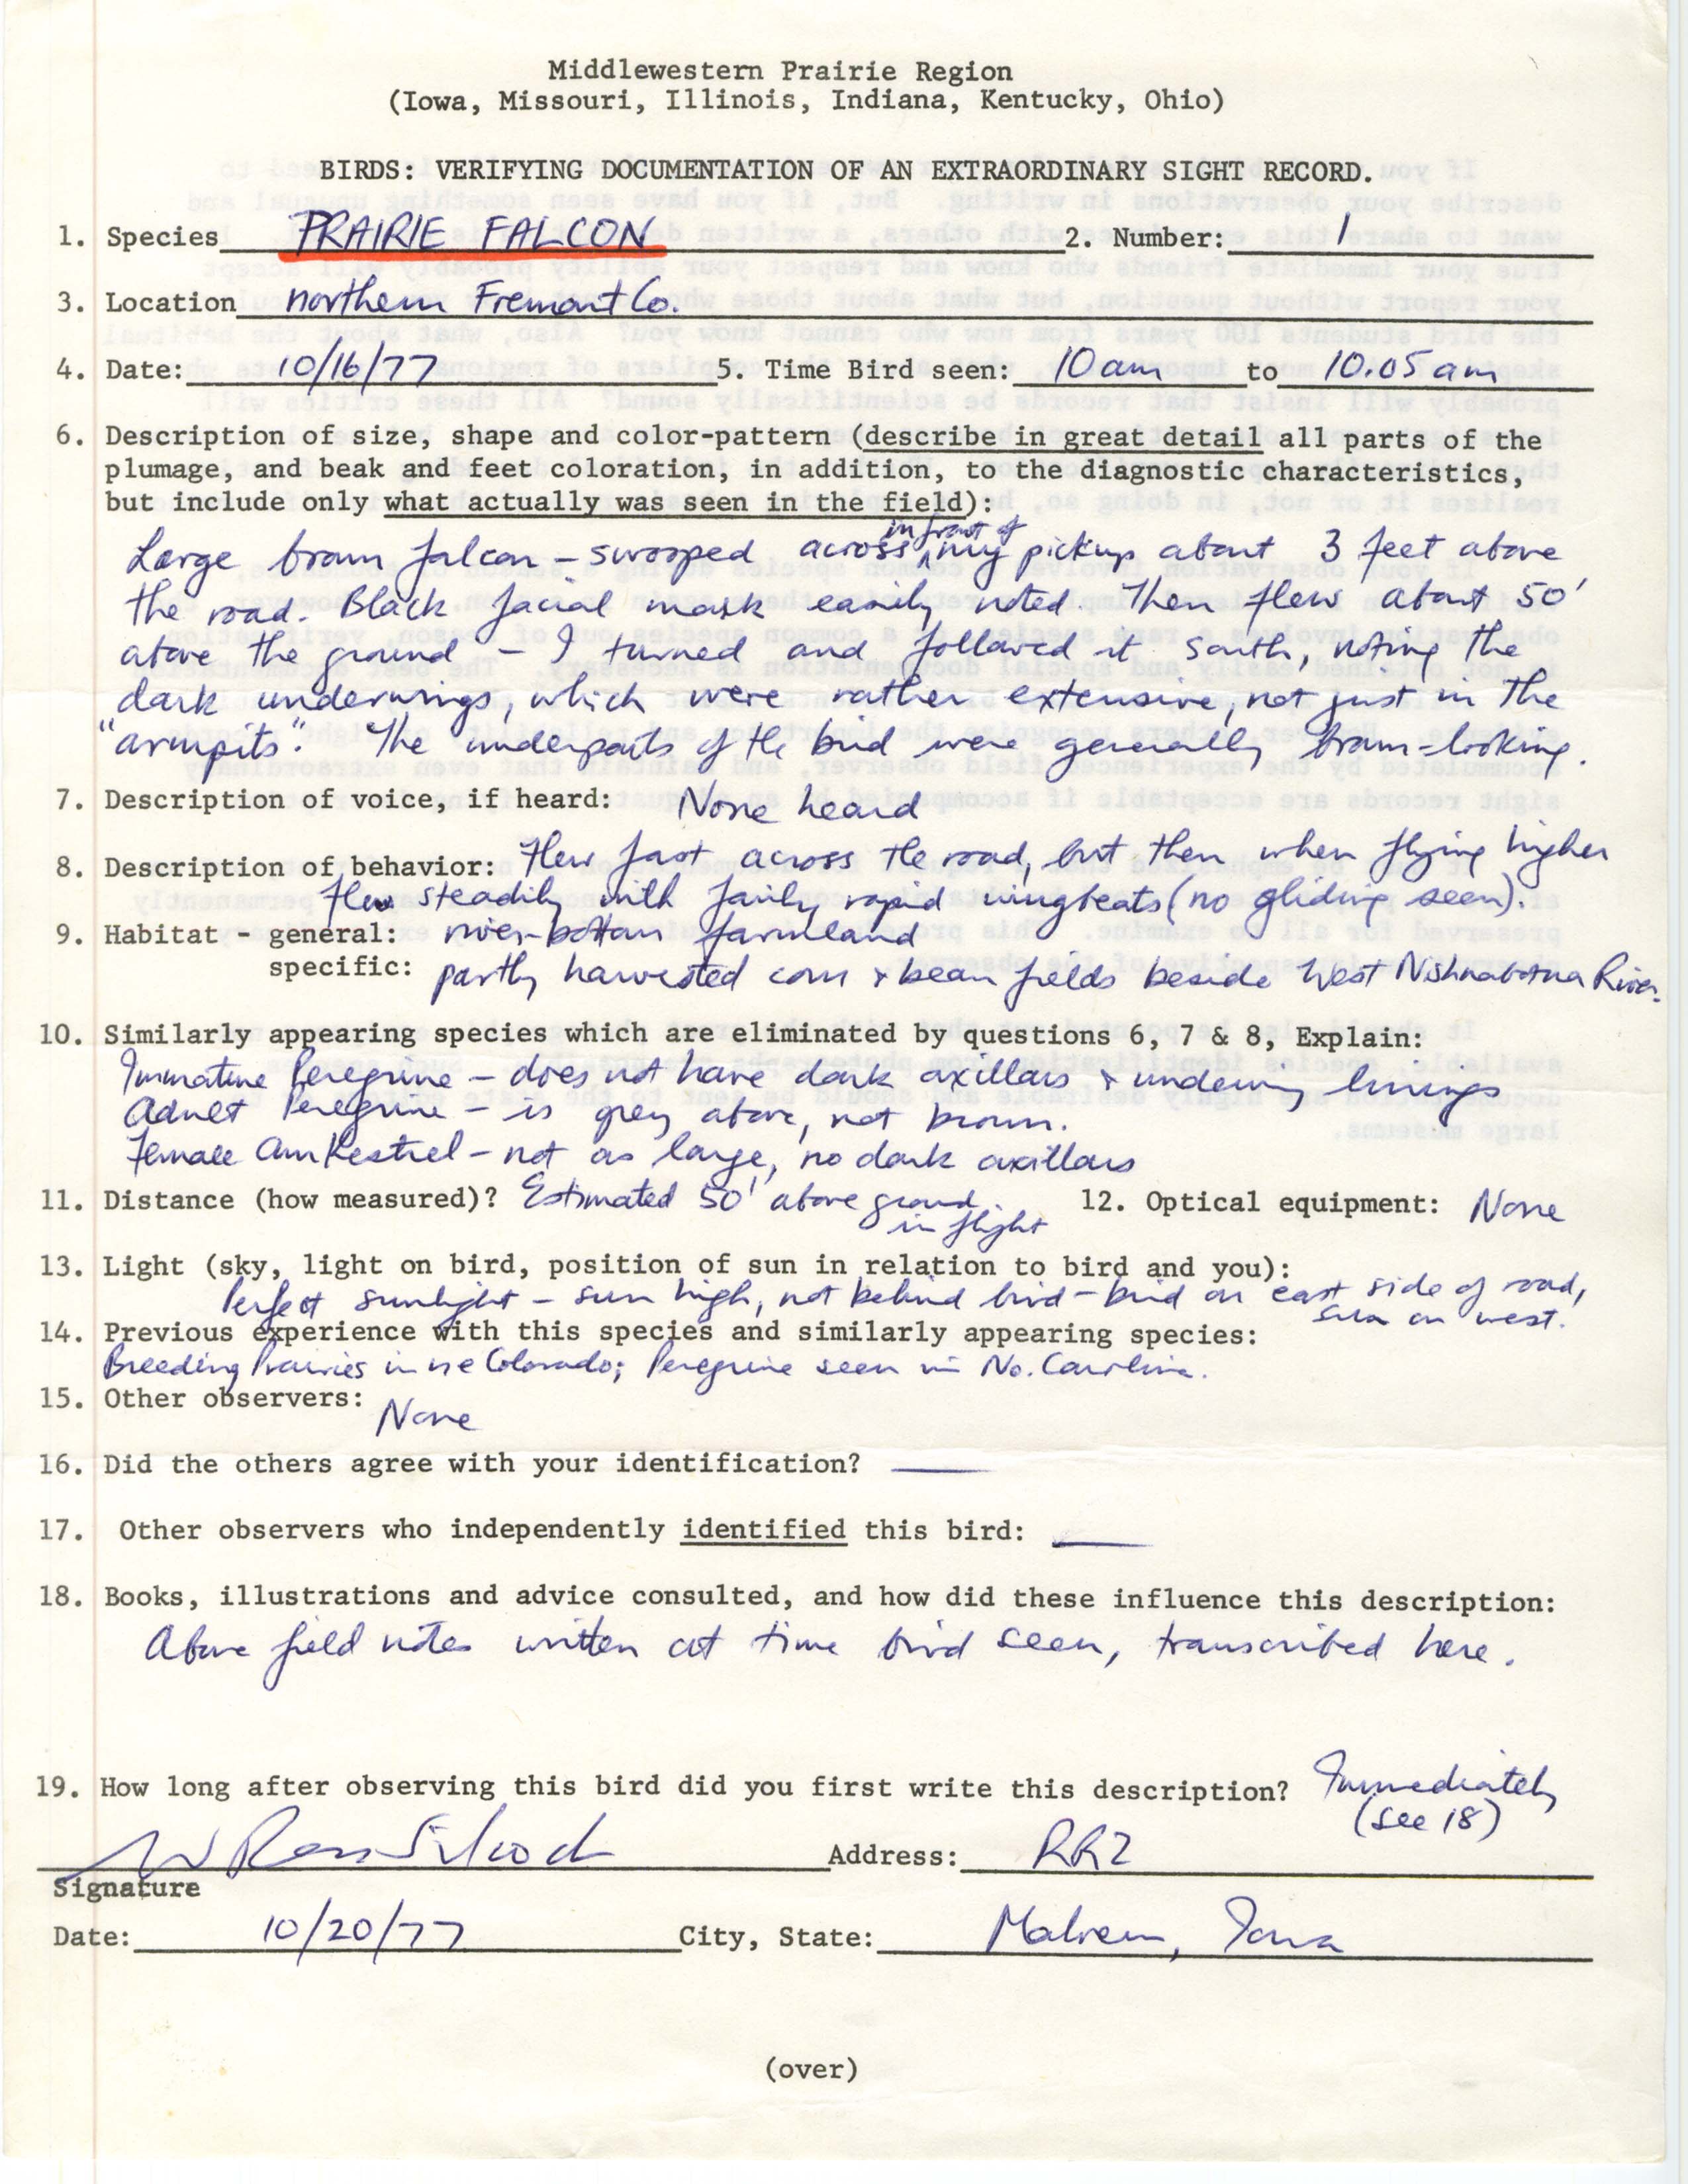 Rare bird documentation form for Prairie Falcon at northern Fremont County, 1977